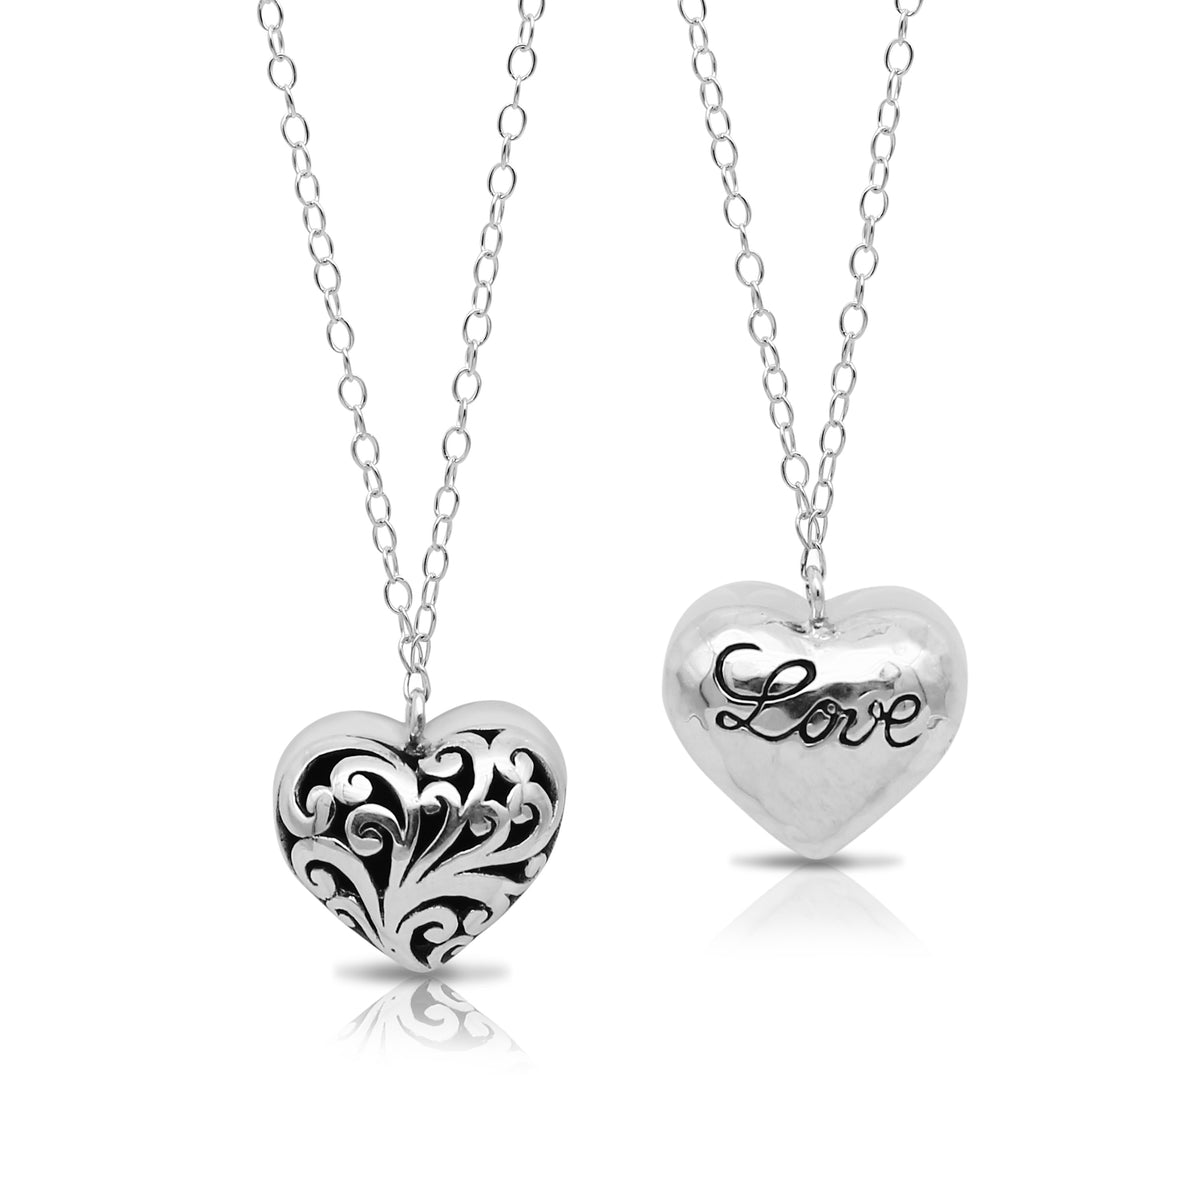 Small LH Scroll Heart-Shaped with "Love" Backside Pendant (16 * 14mm) Necklace 18"